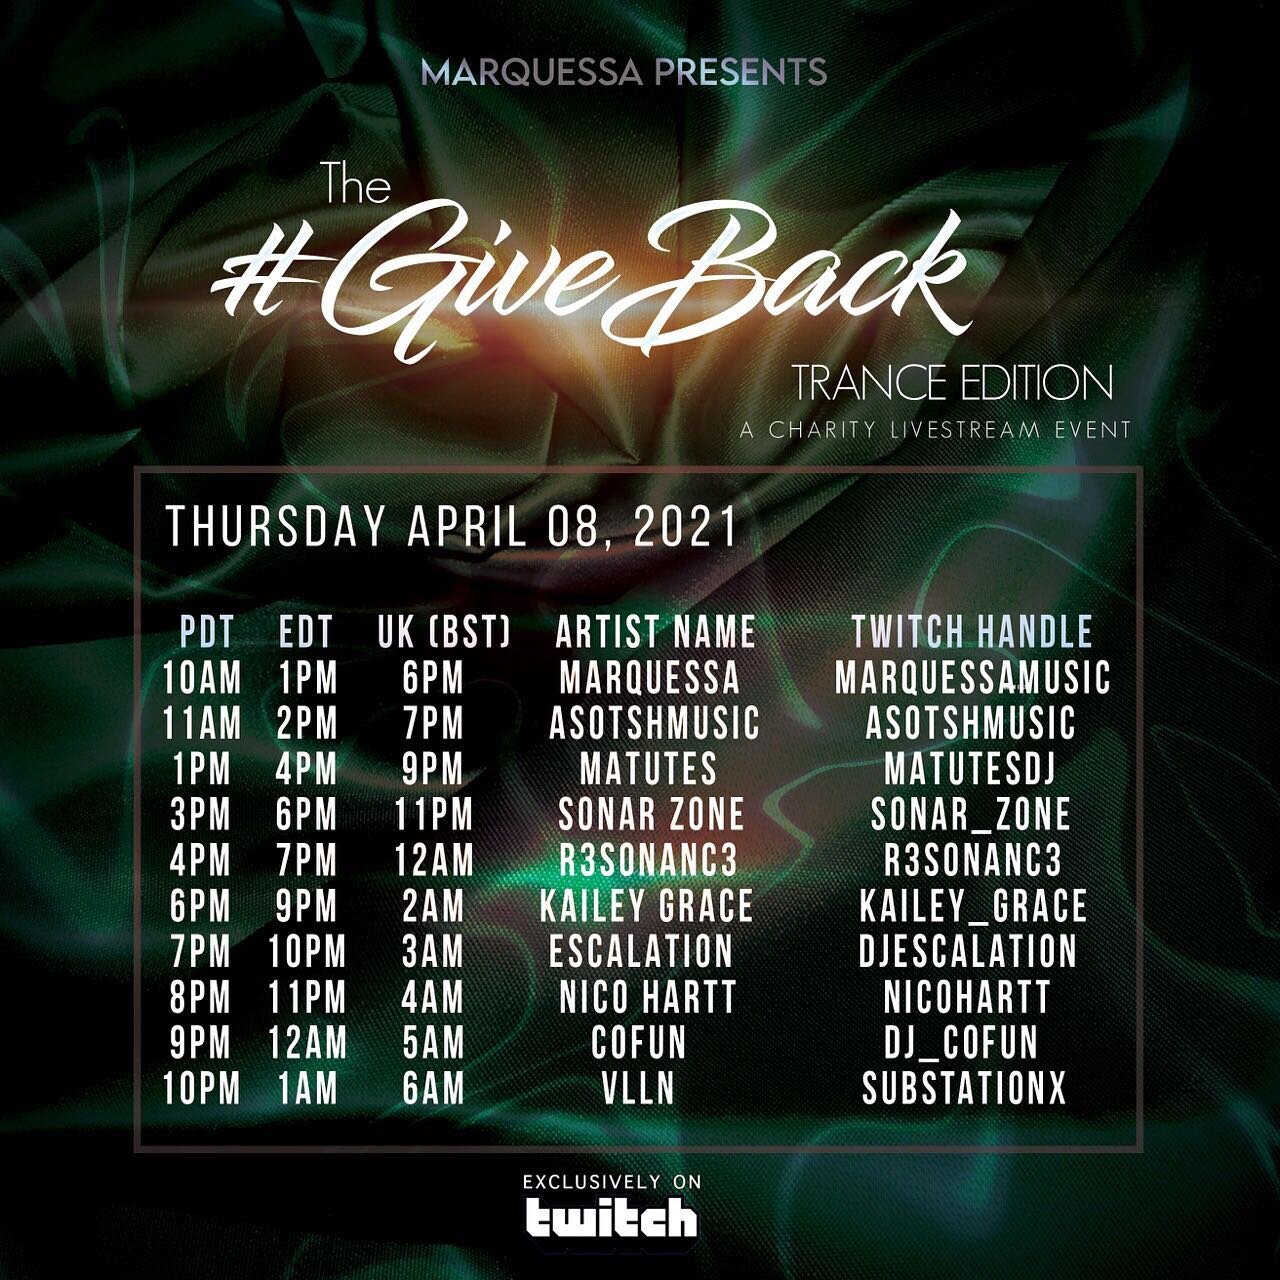 Top of the hour 10am PDT @marquessamusic #giveback #trance charity event! 🎶🙏🏼🎶 my set is at 7pm PDT raising $ for the Coronavirus Respond Fund for Nurses 👩🏻&zwj;⚕️👨&zwj;⚕️ 
.
.
www.twitch.tv/djescalation
.
.
#trance #trancebutter #djescalation